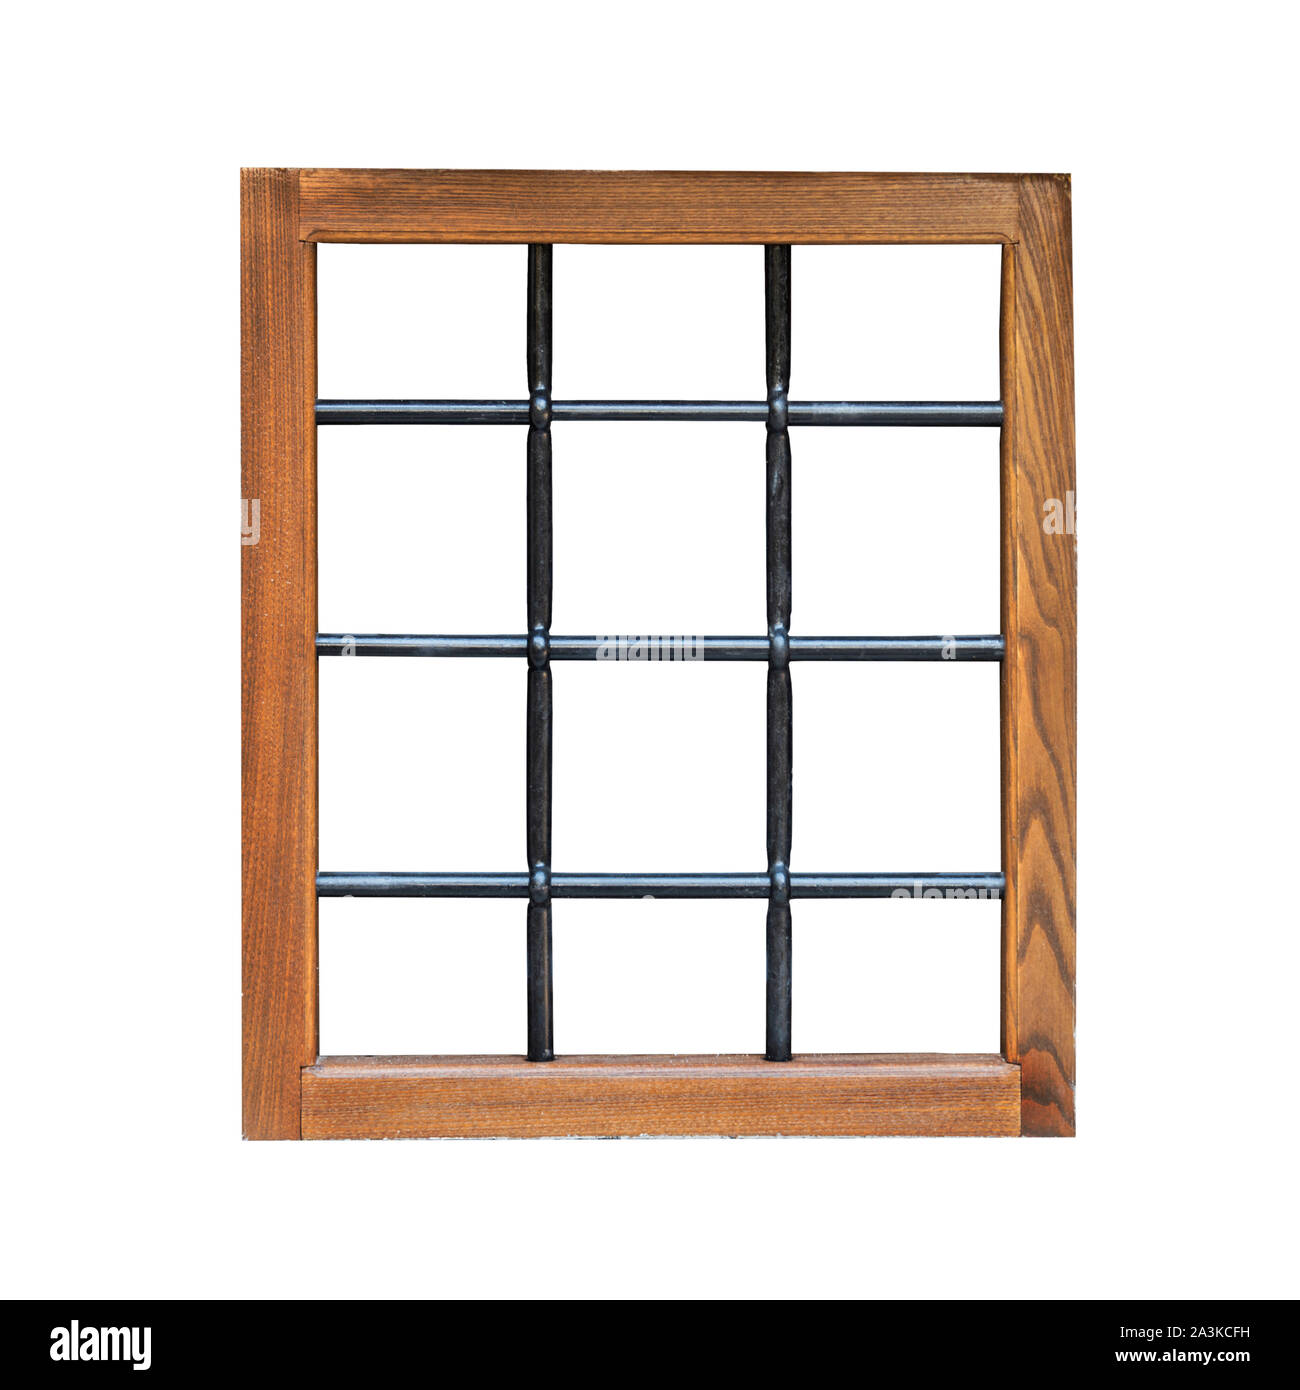 Wooden window frame with iron bars Stock Photo